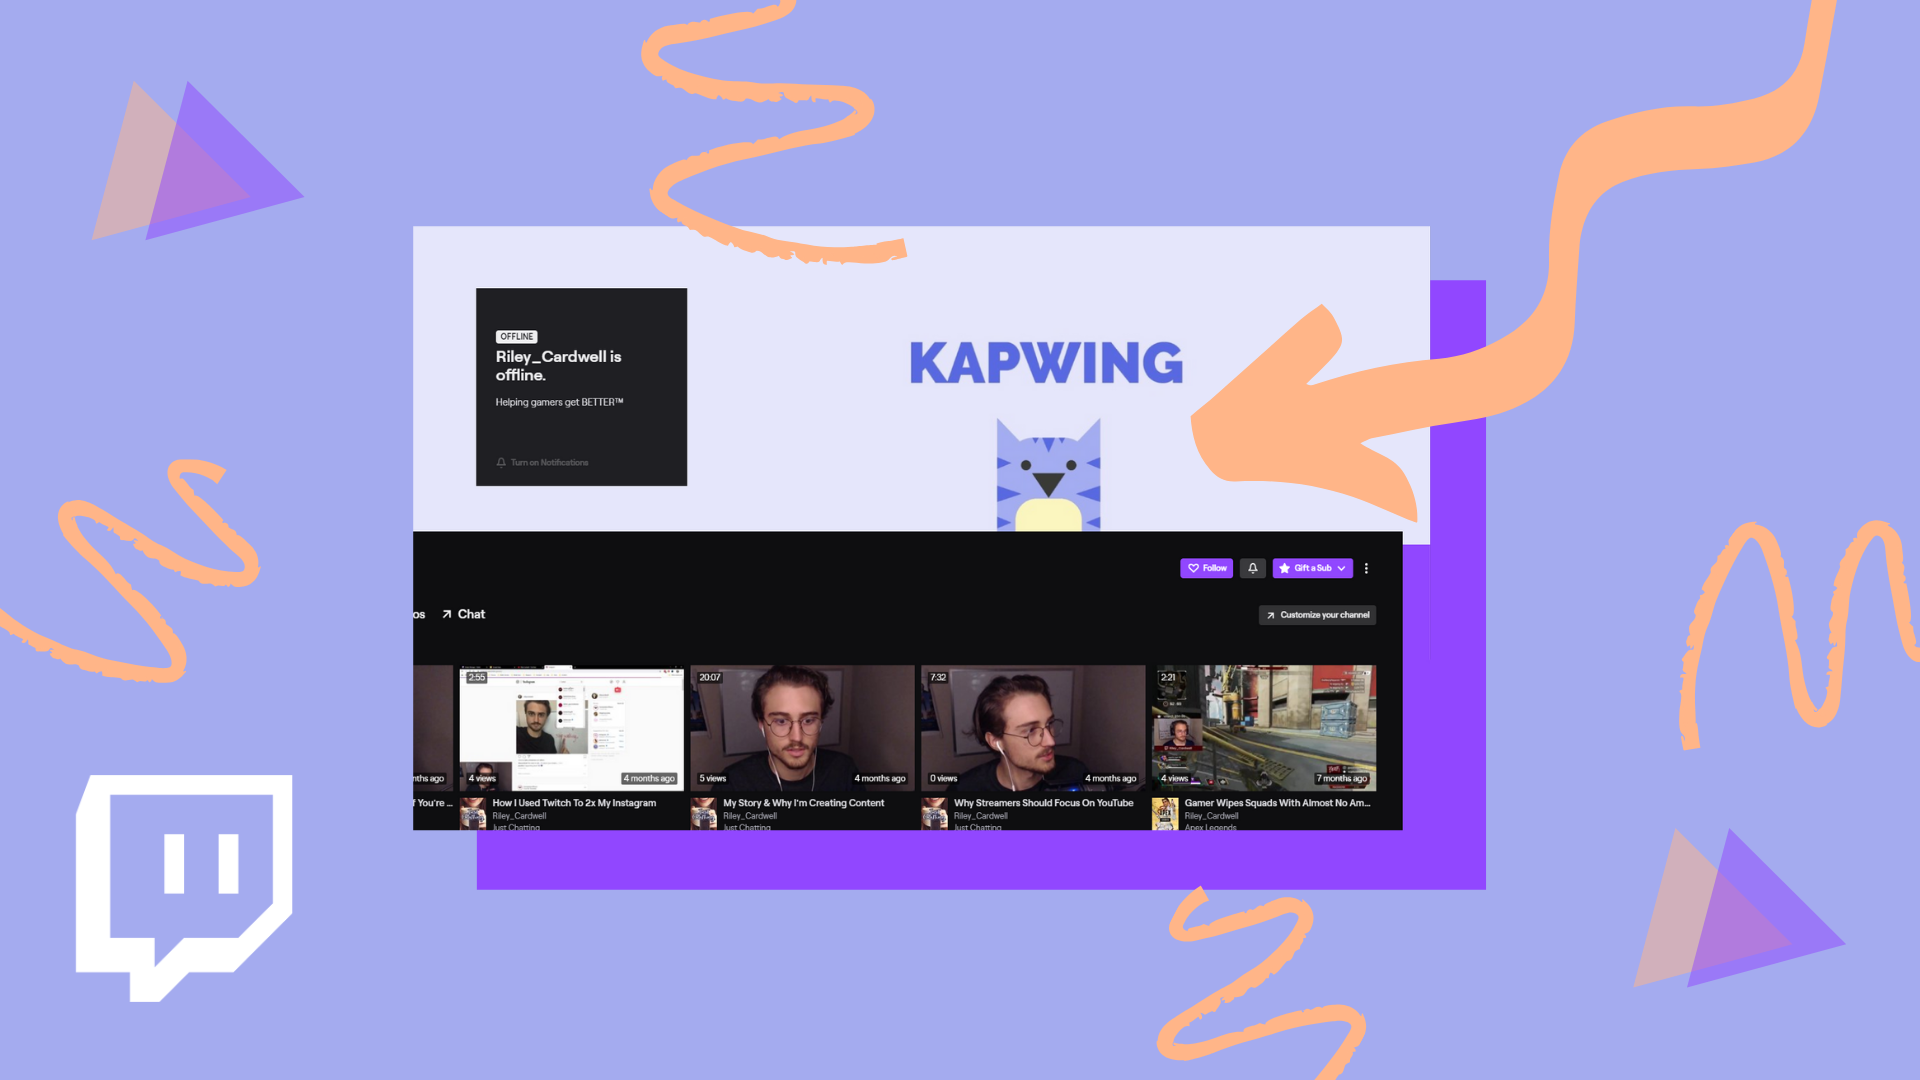 twitch video player banner size